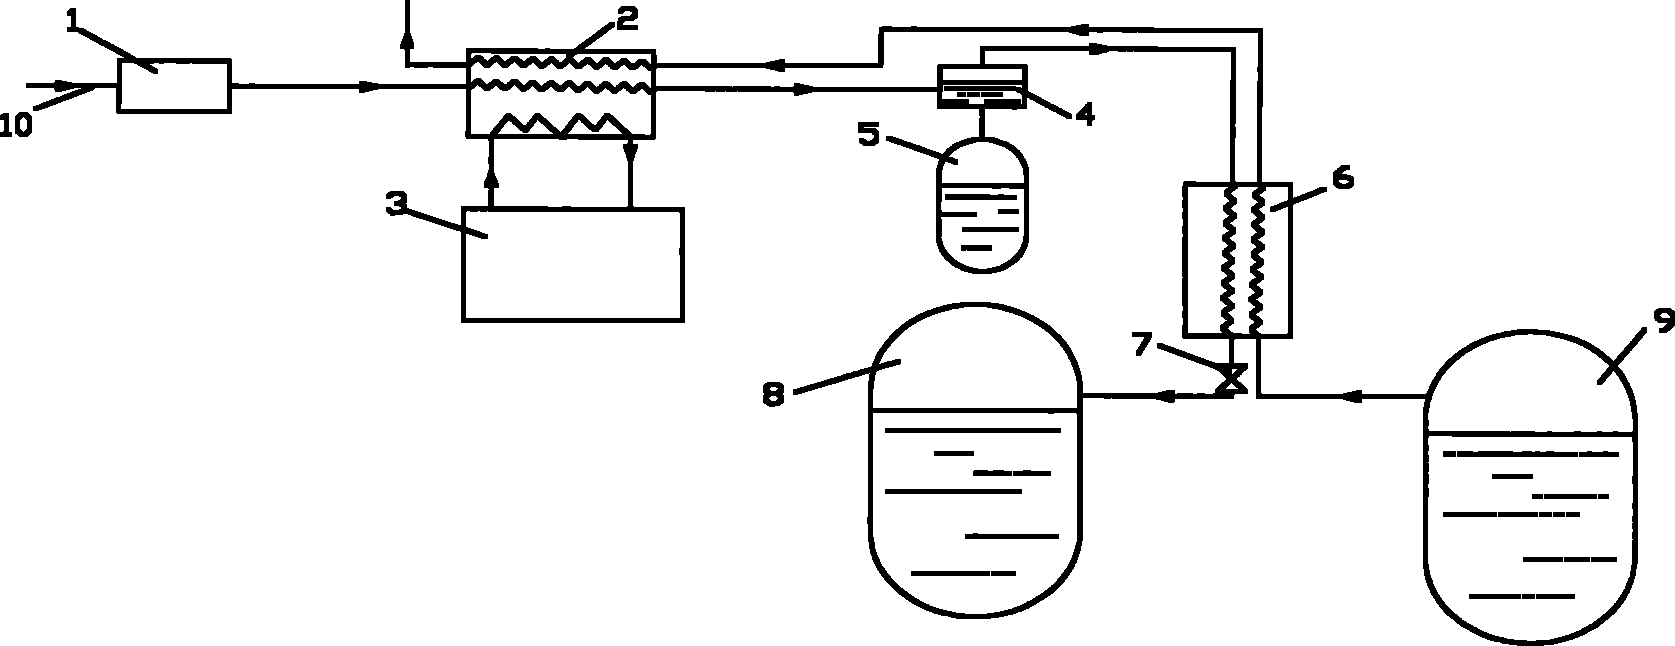 System for producing liquefied natural gas by utilizing liquid nitrogen cold energy